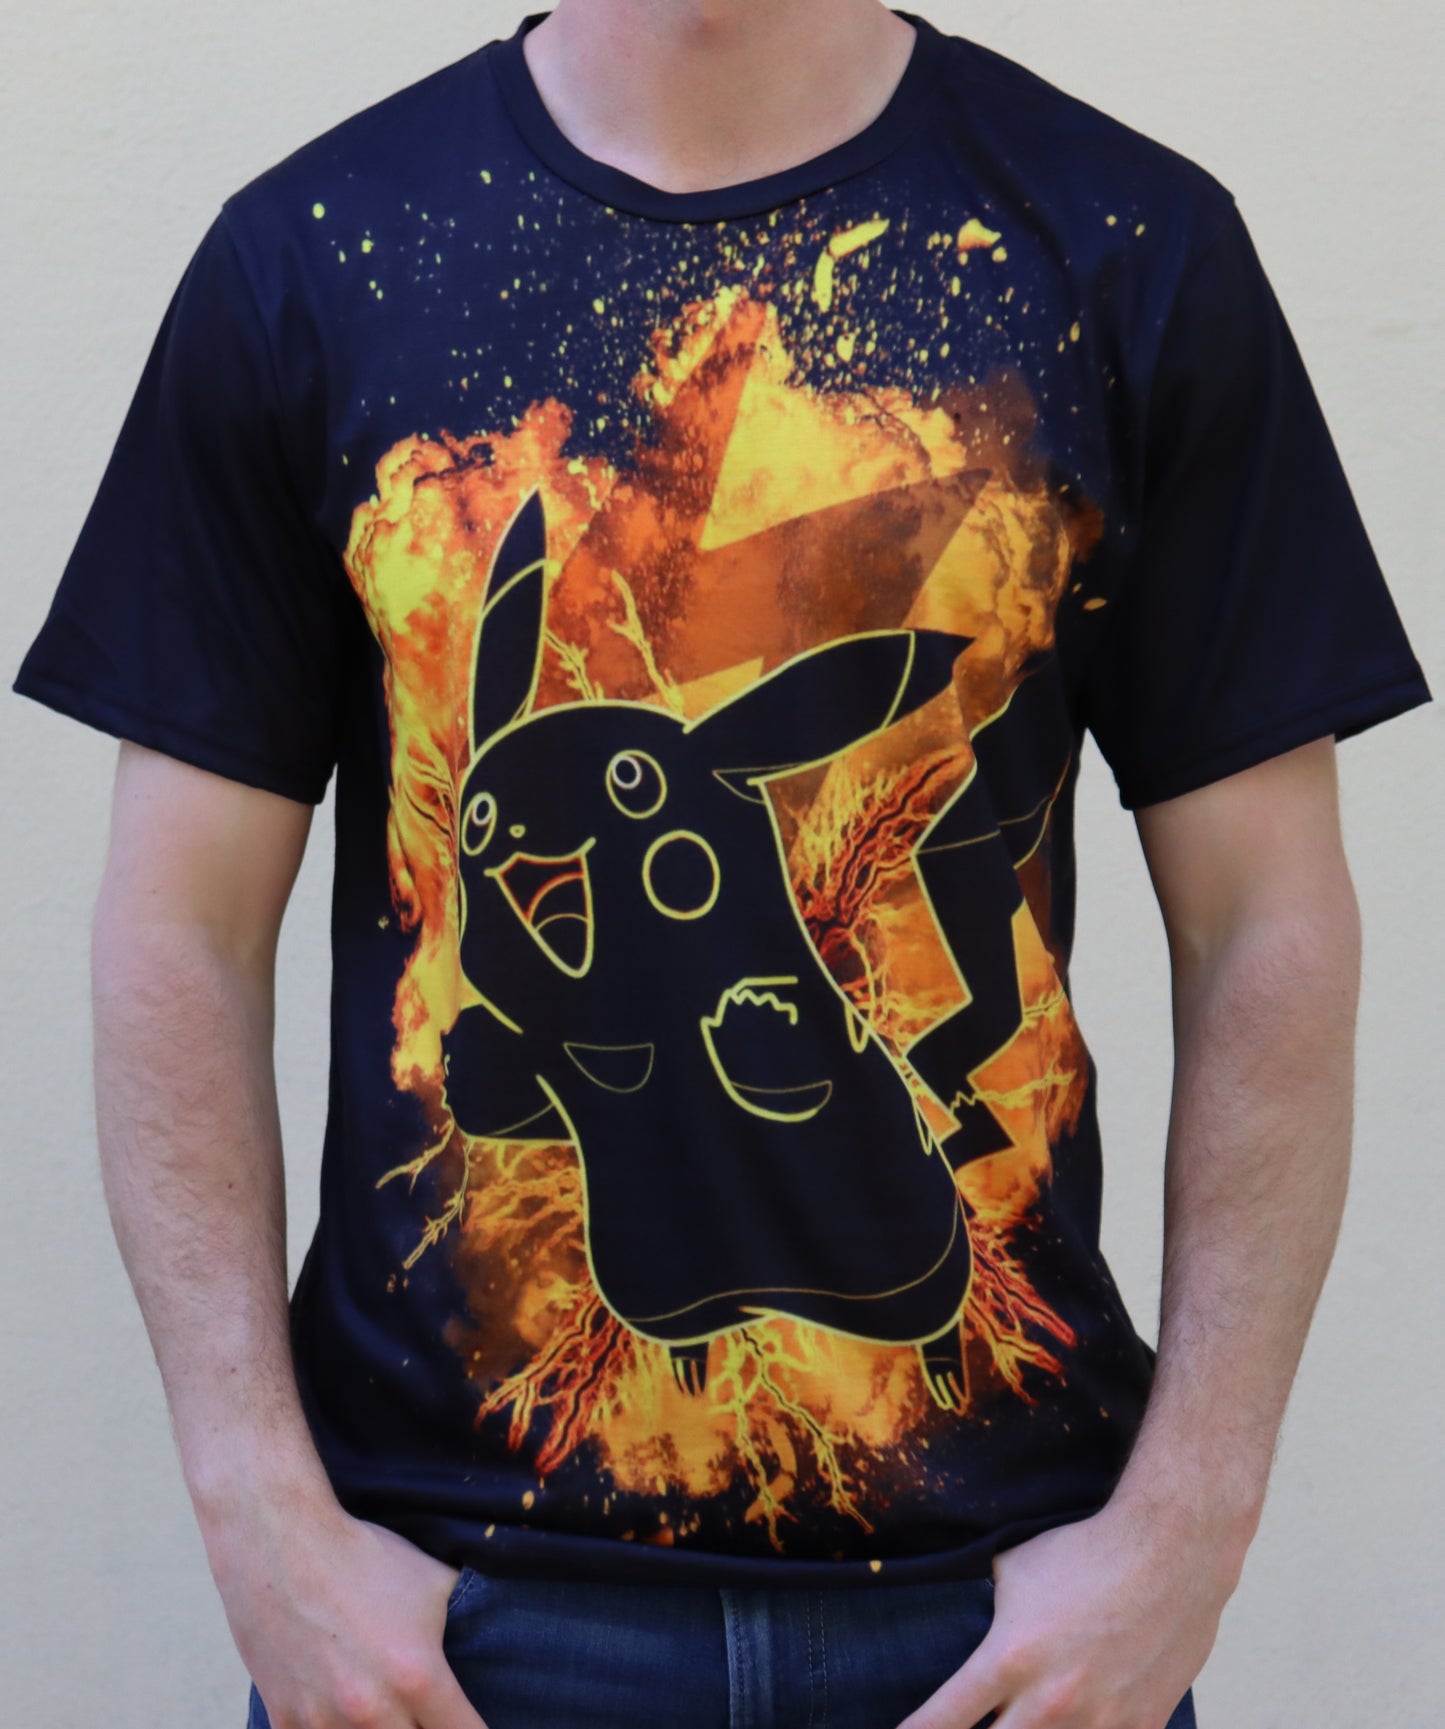 Pokemon - Pikachu TShirt (Price Does Not Include Shipping - Please Read Description)